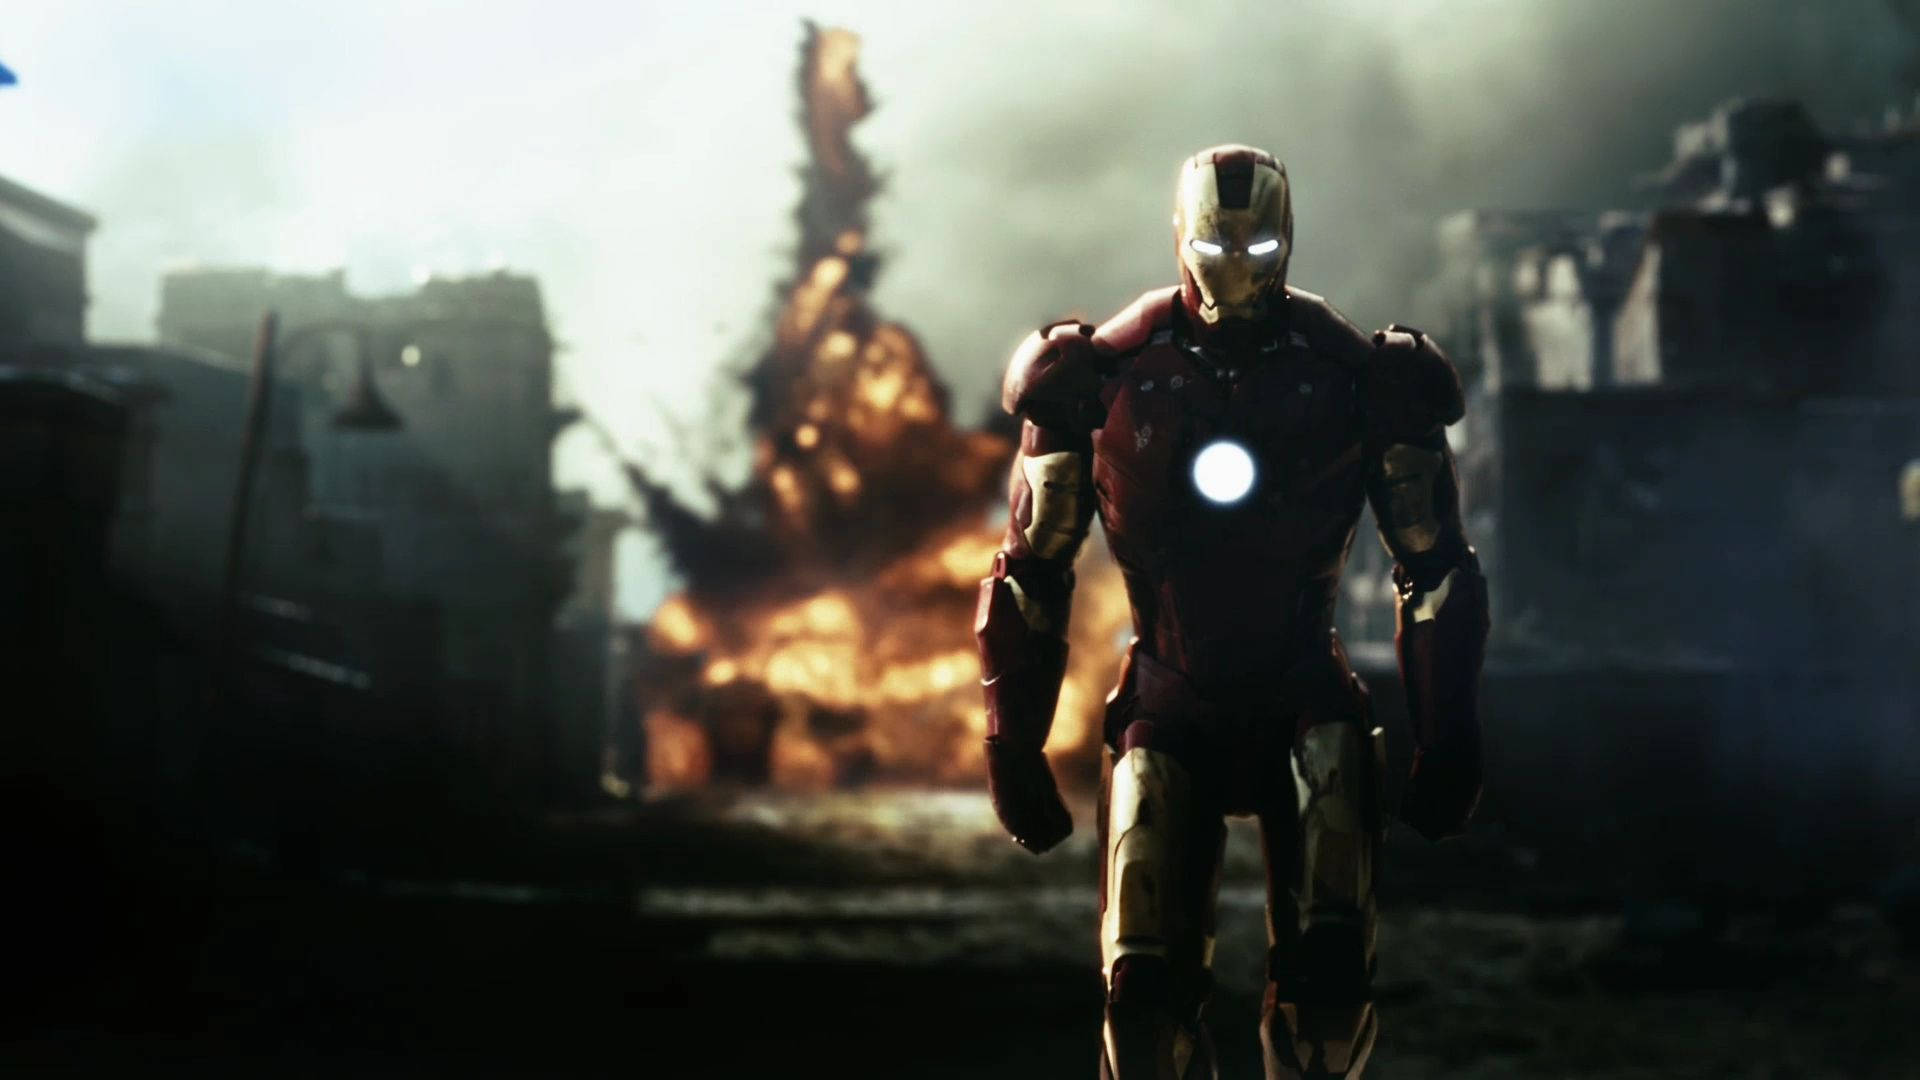 The Iron Man Movie – Saving the world one Suit at a Time Wallpaper